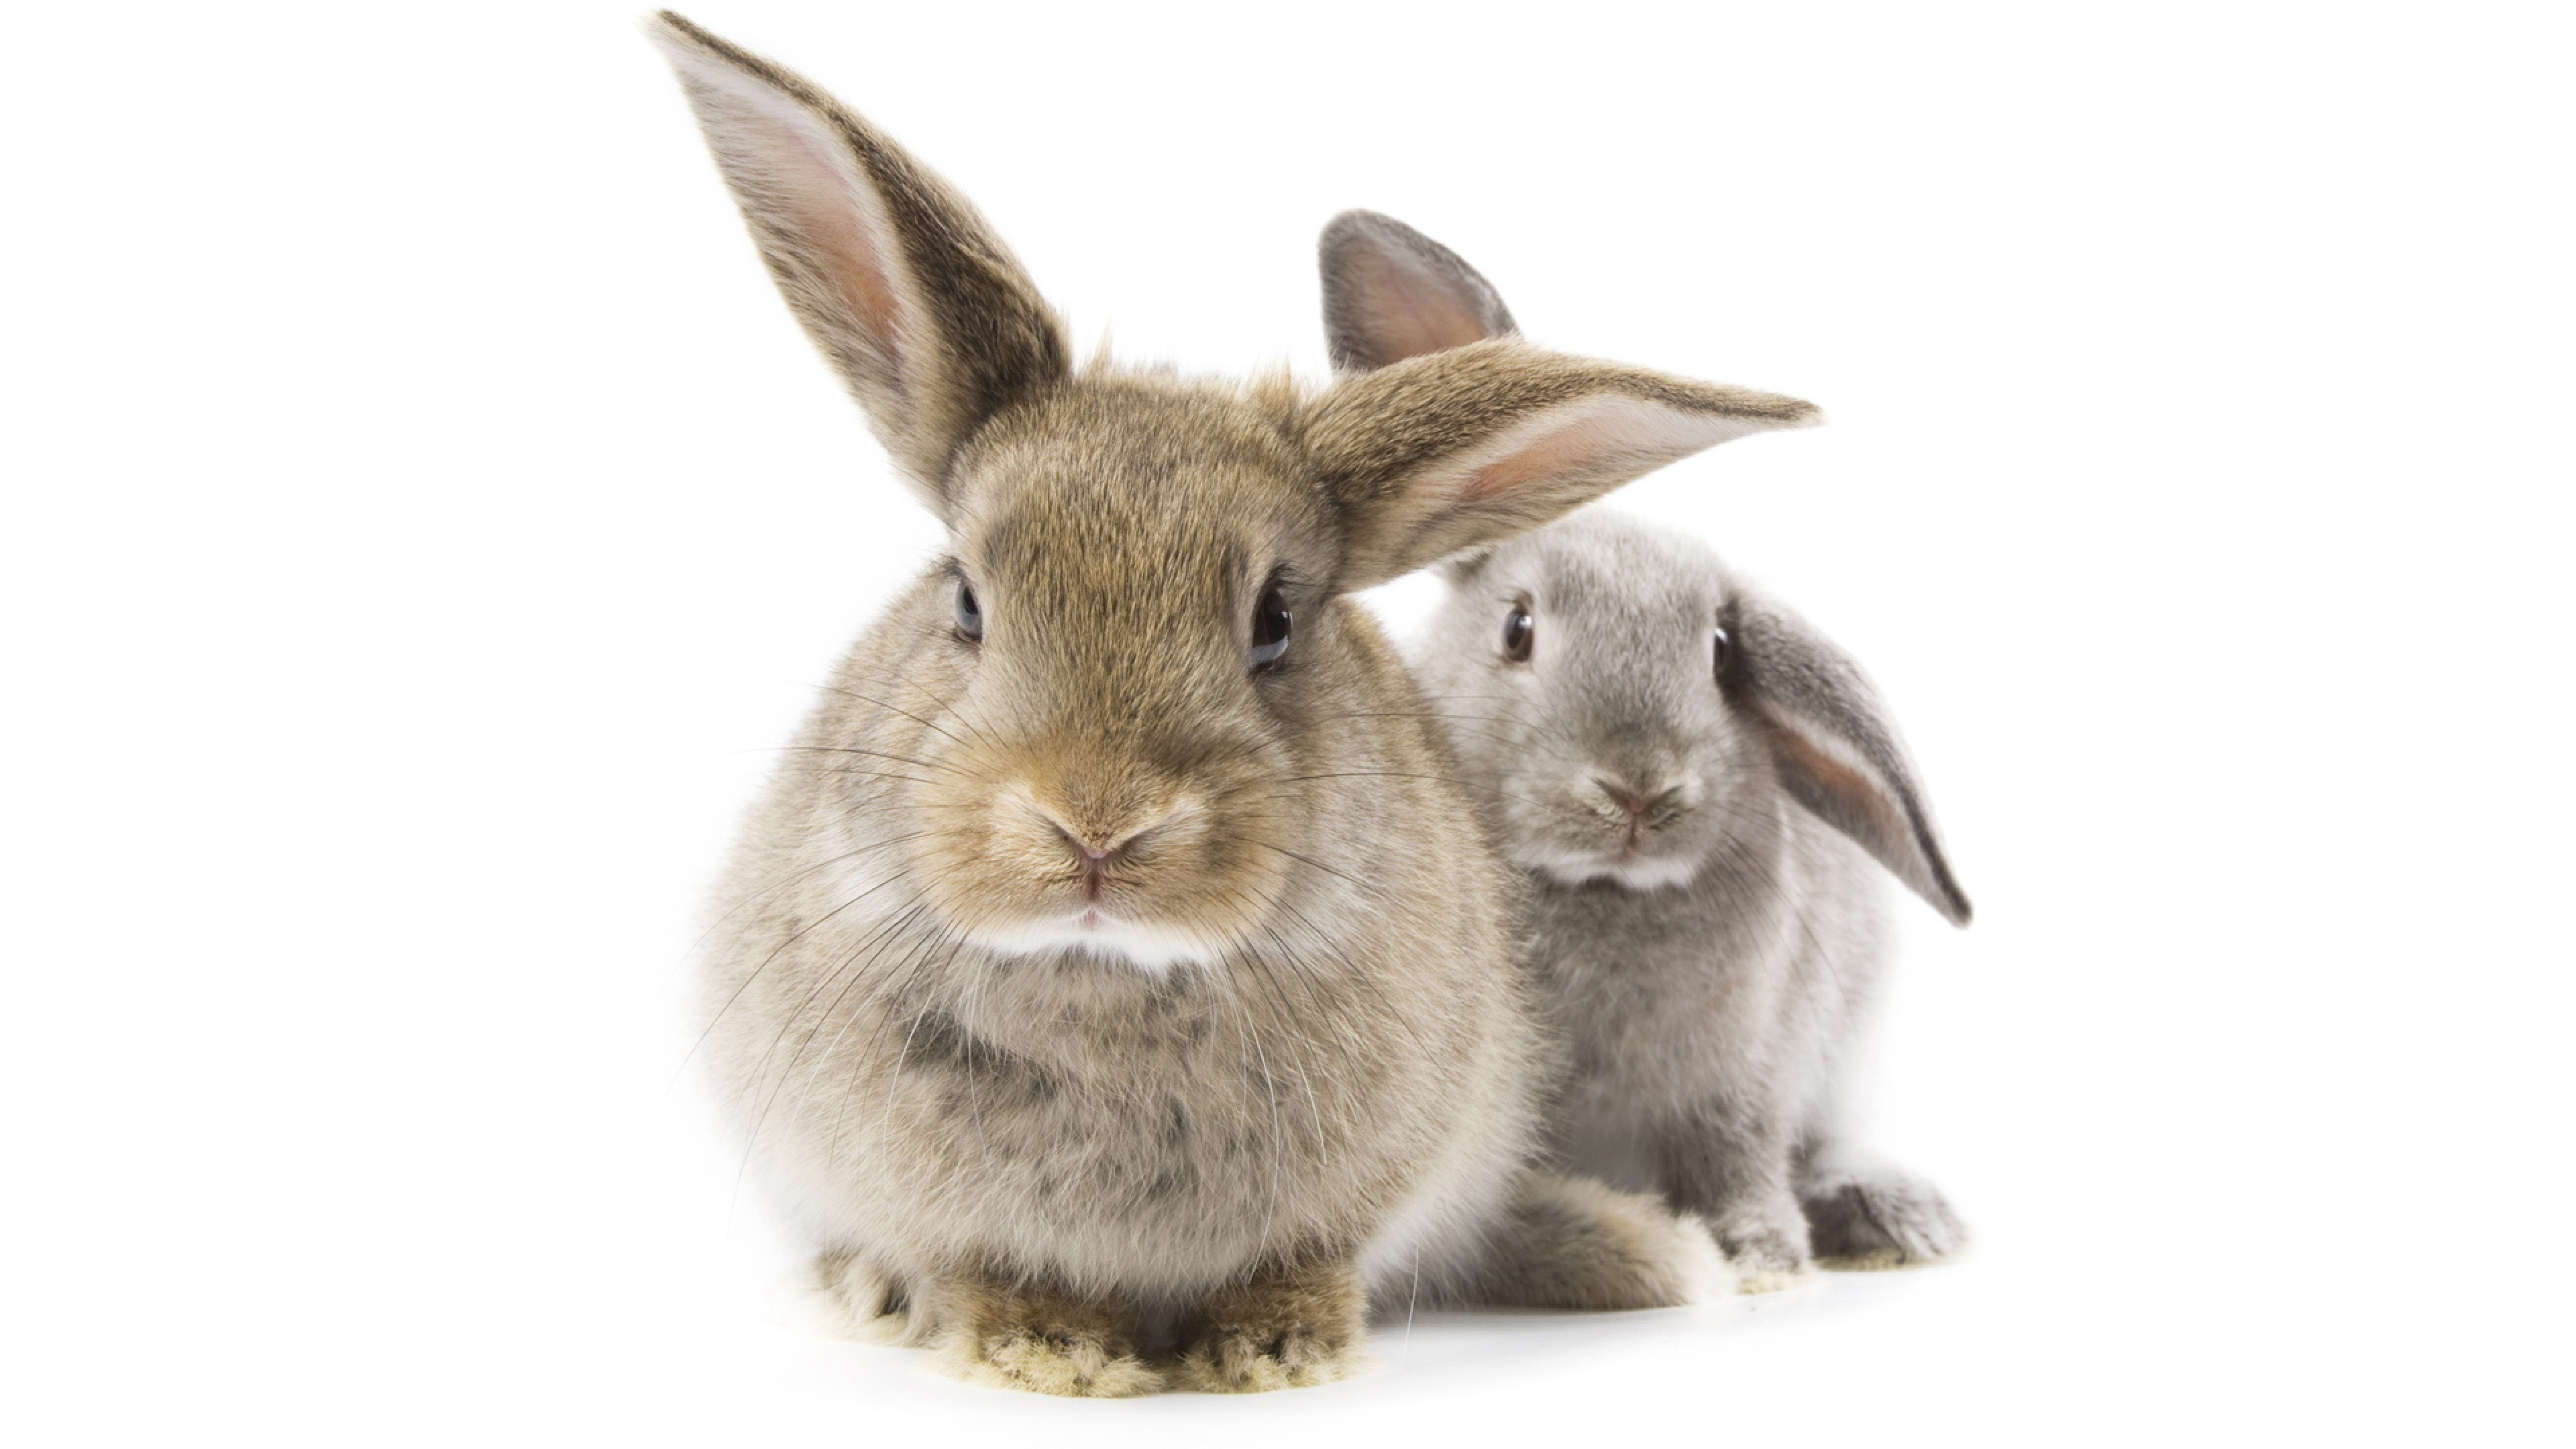 Photo of two rabbits